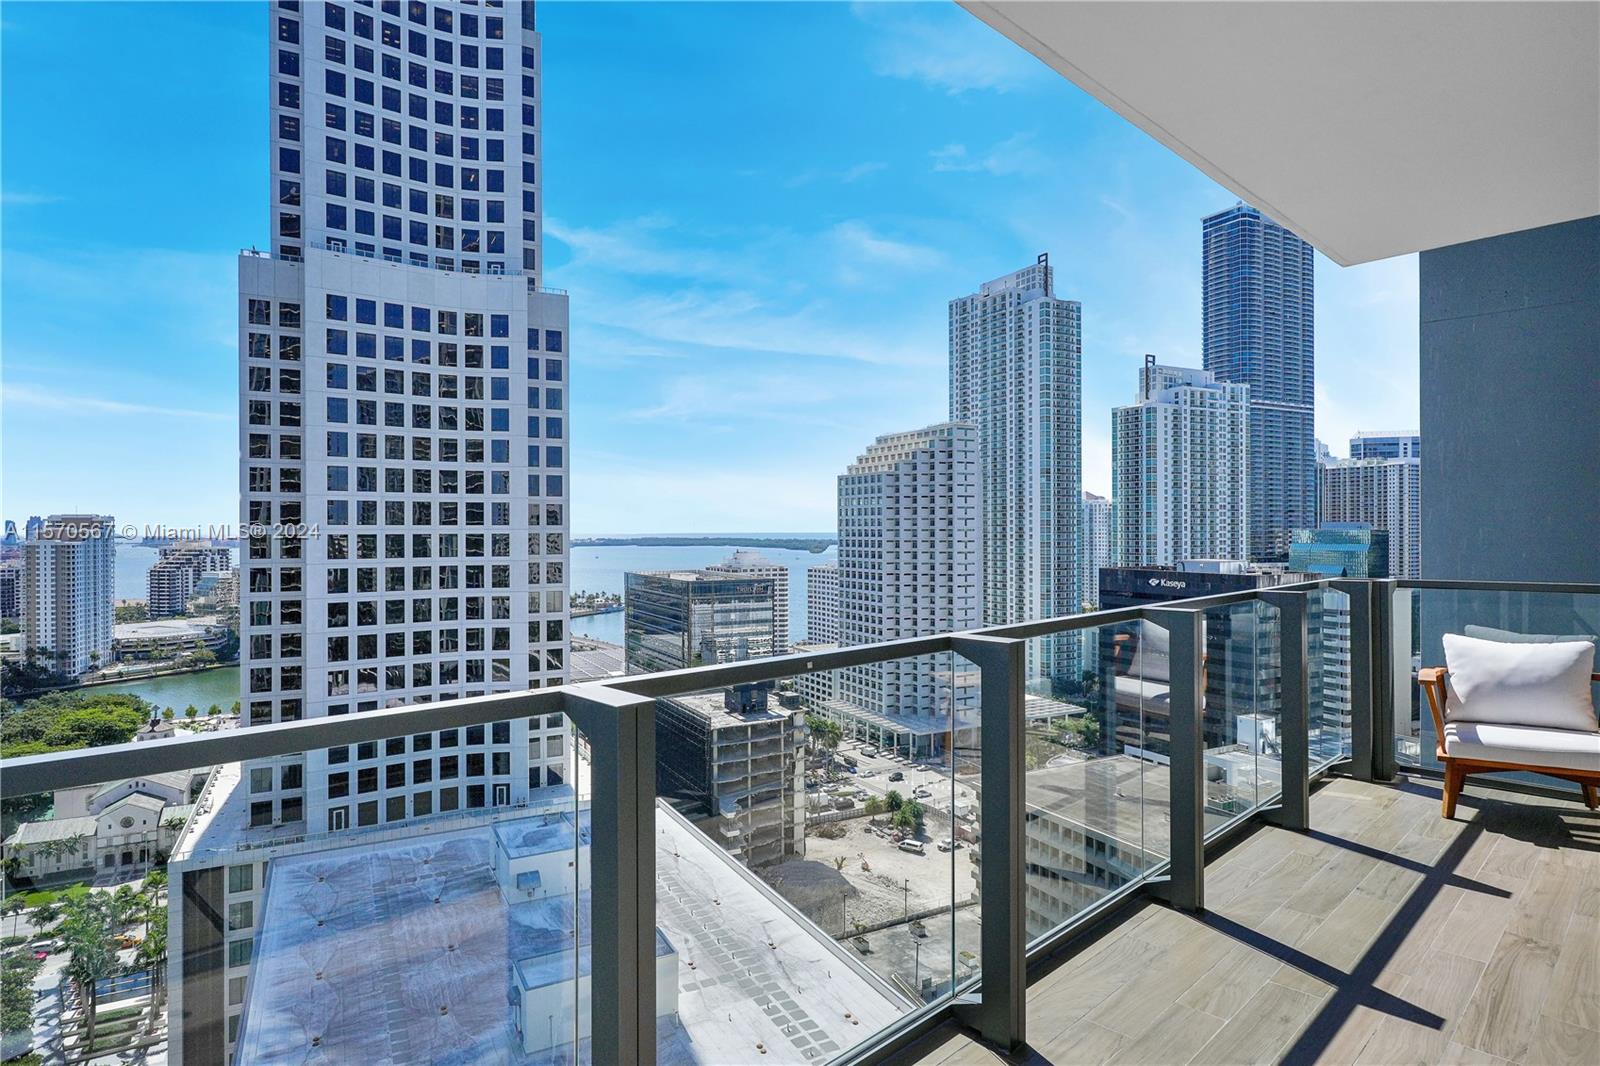 Experience and call this light filled, directly east facing unit offering water and city views your next home in the desirable Reach at Brickell City Centre. This 1 bed, 1.5 bath features floor to ceiling 10’ windows and doors, marble floors throughout and top of the line chef’s kitchen with modern cabnietry and quartz countertops, Bosch stainless steel appliances and island. Primary suite offers walk in oversized closet and spacious bathroom with shower & soaking tub and two sinks. Reach at Brickell City Center offers convenience and total enjoyment from the half-acre amenity deck which includes tropical gardens, bbq grills, 2 swimming pools, outdoor & indoor fitness, spa and children's play area. Direct access to top rated dining and shopping. 24 hour concierge and security.